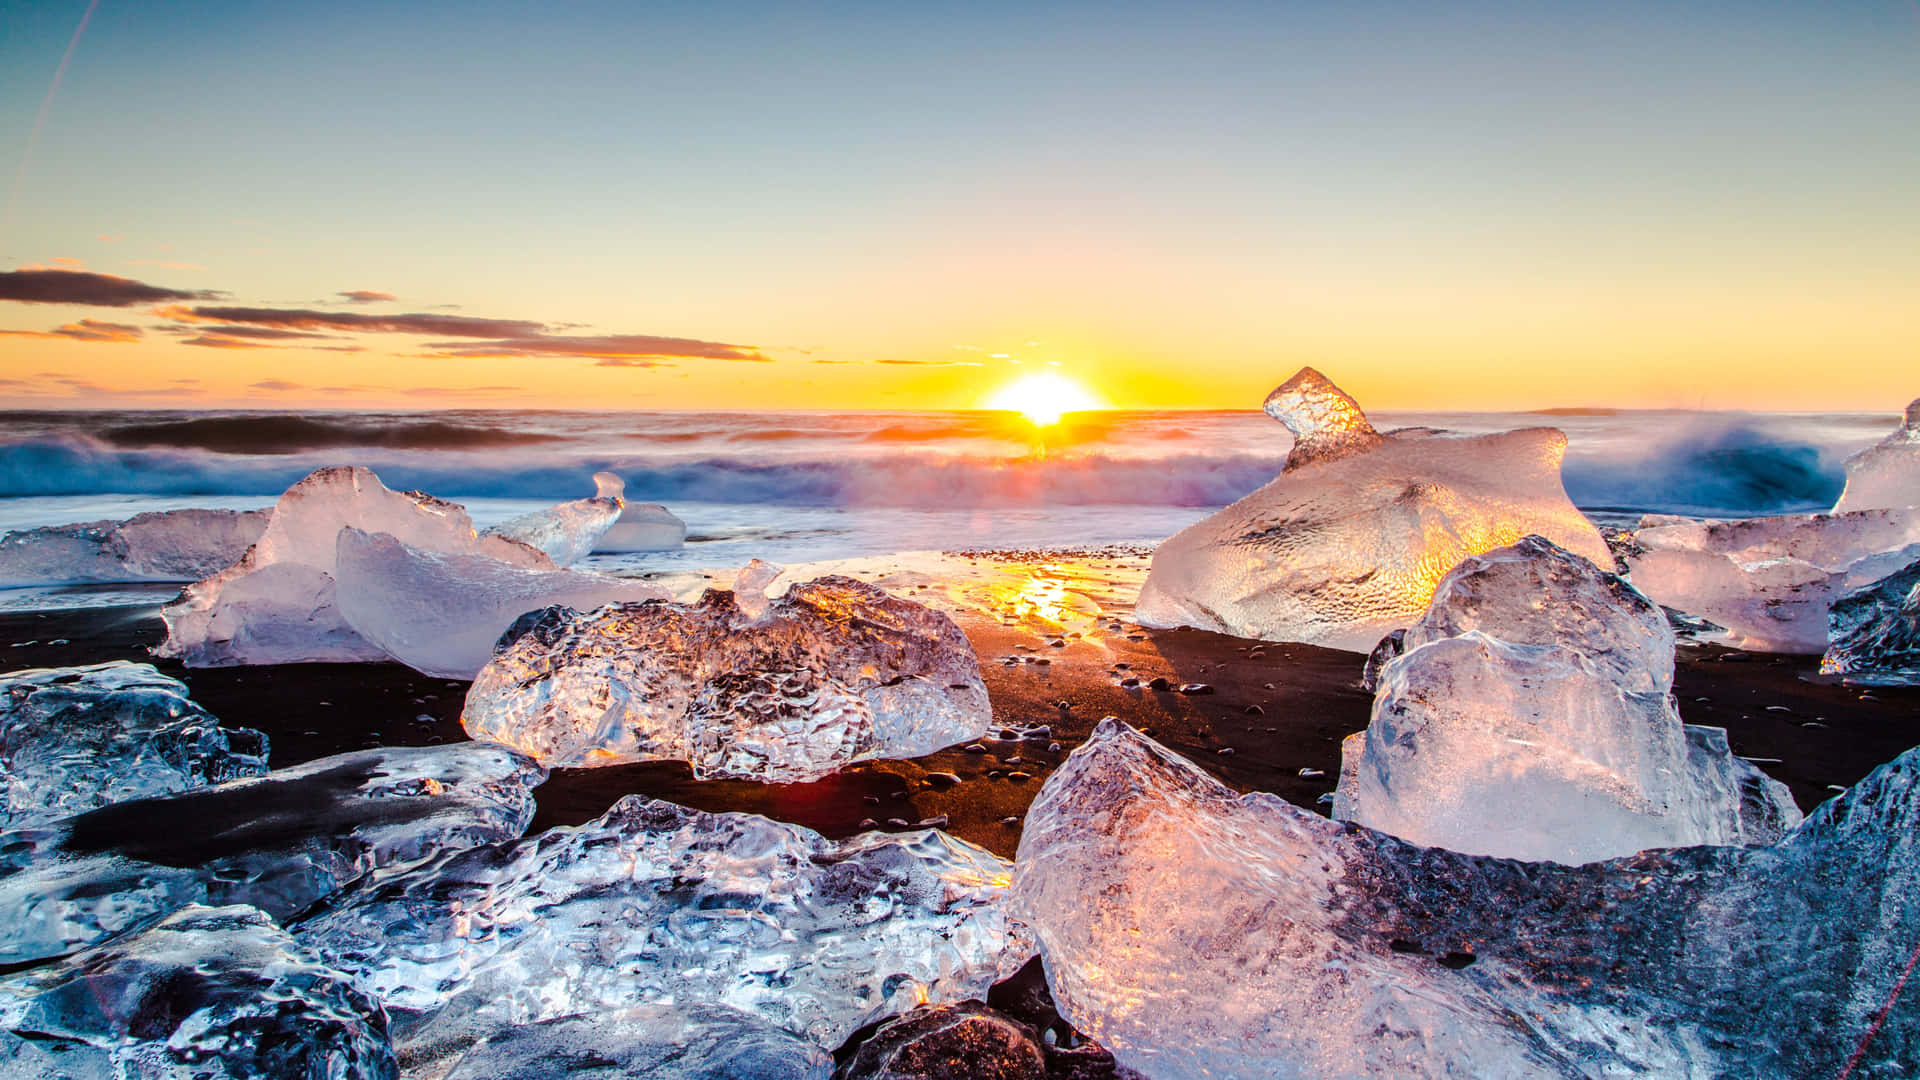 A wondrous outdoor landscape blanketed in ice